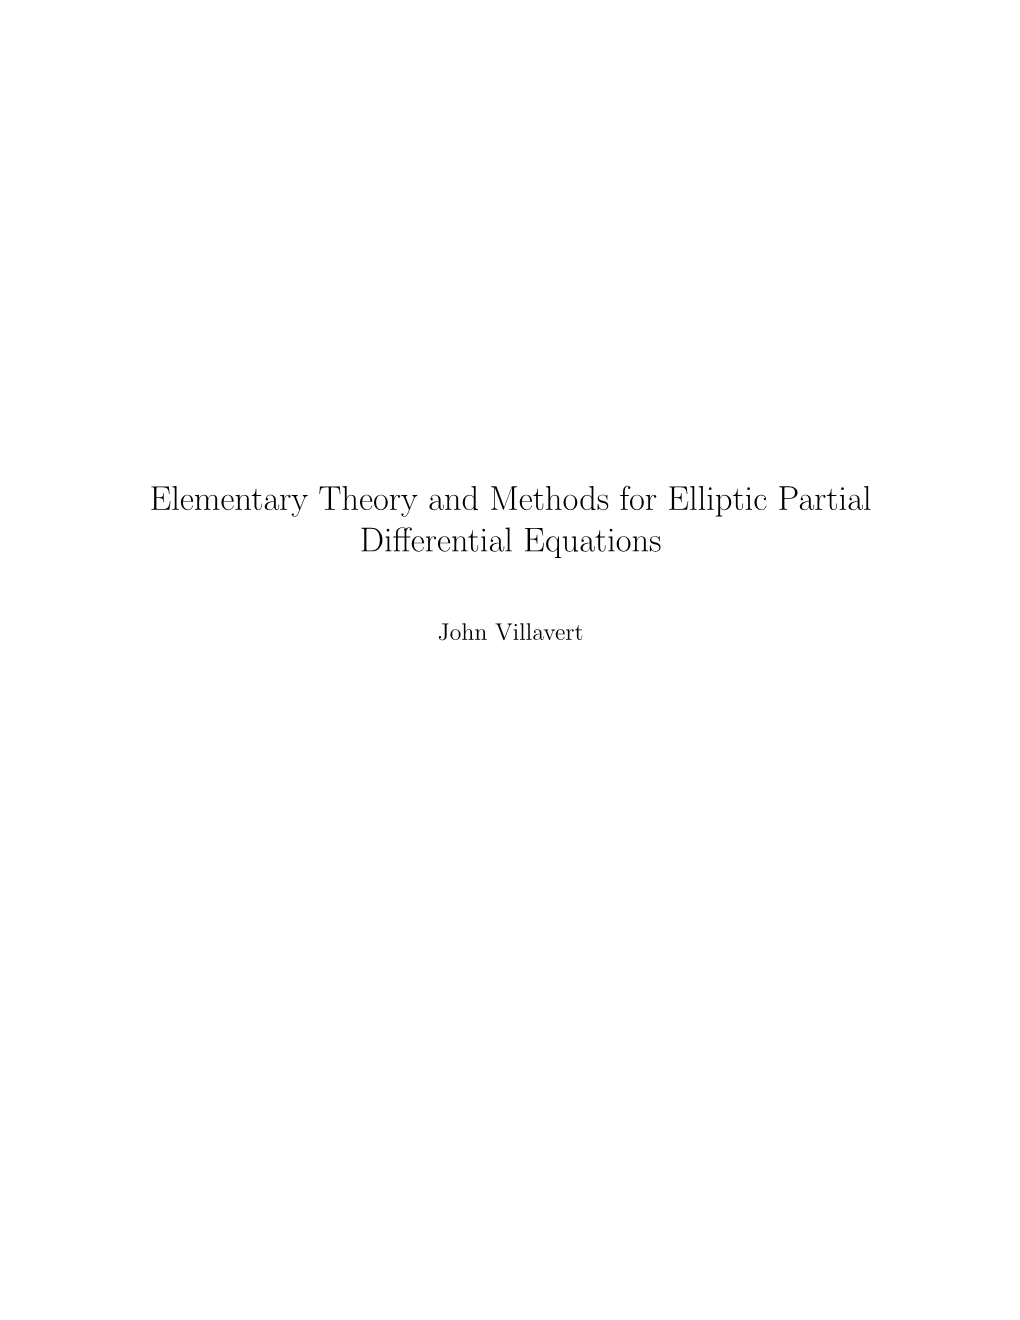 Elementary Theory and Methods for Elliptic Partial Differential Equations